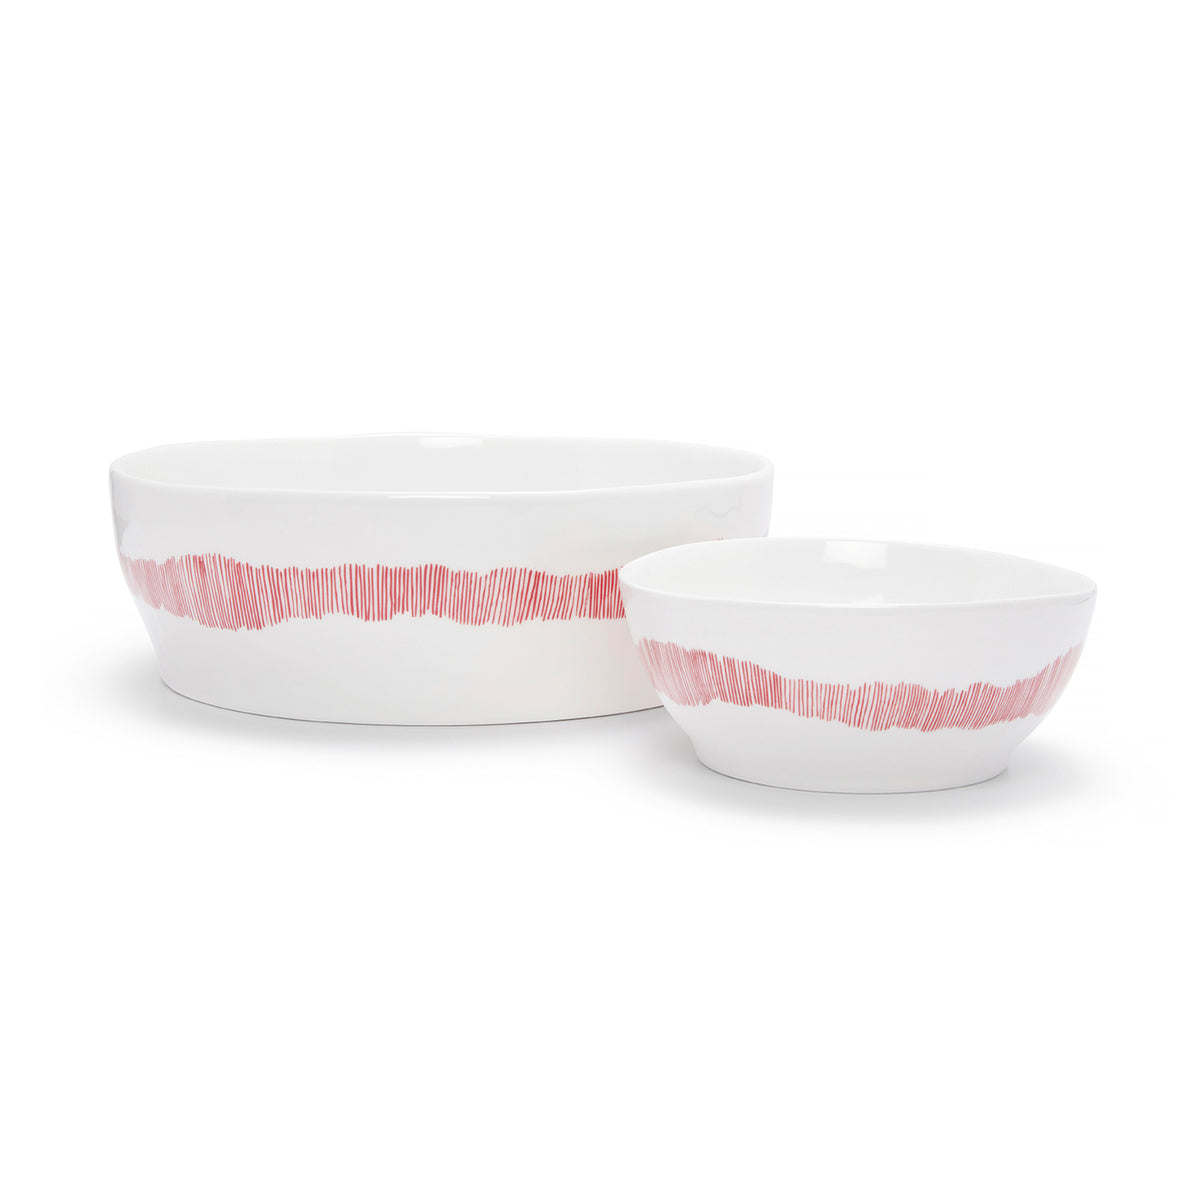 White and Red Stripe Bowls - 5 Piece Set